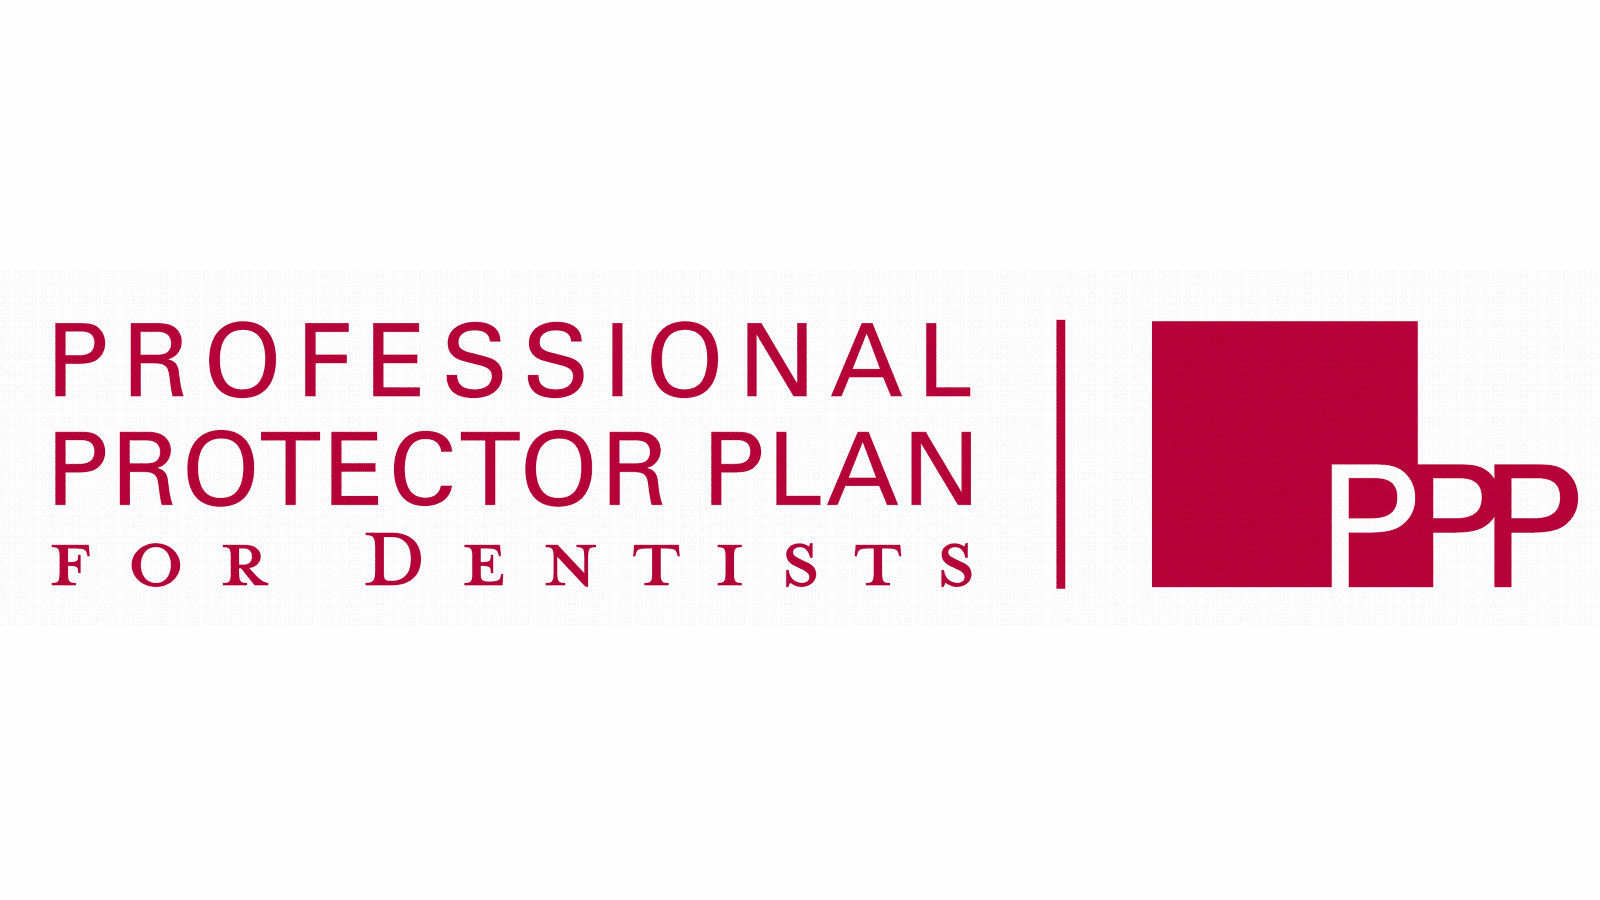 Professional protector plan for dentists logo 1